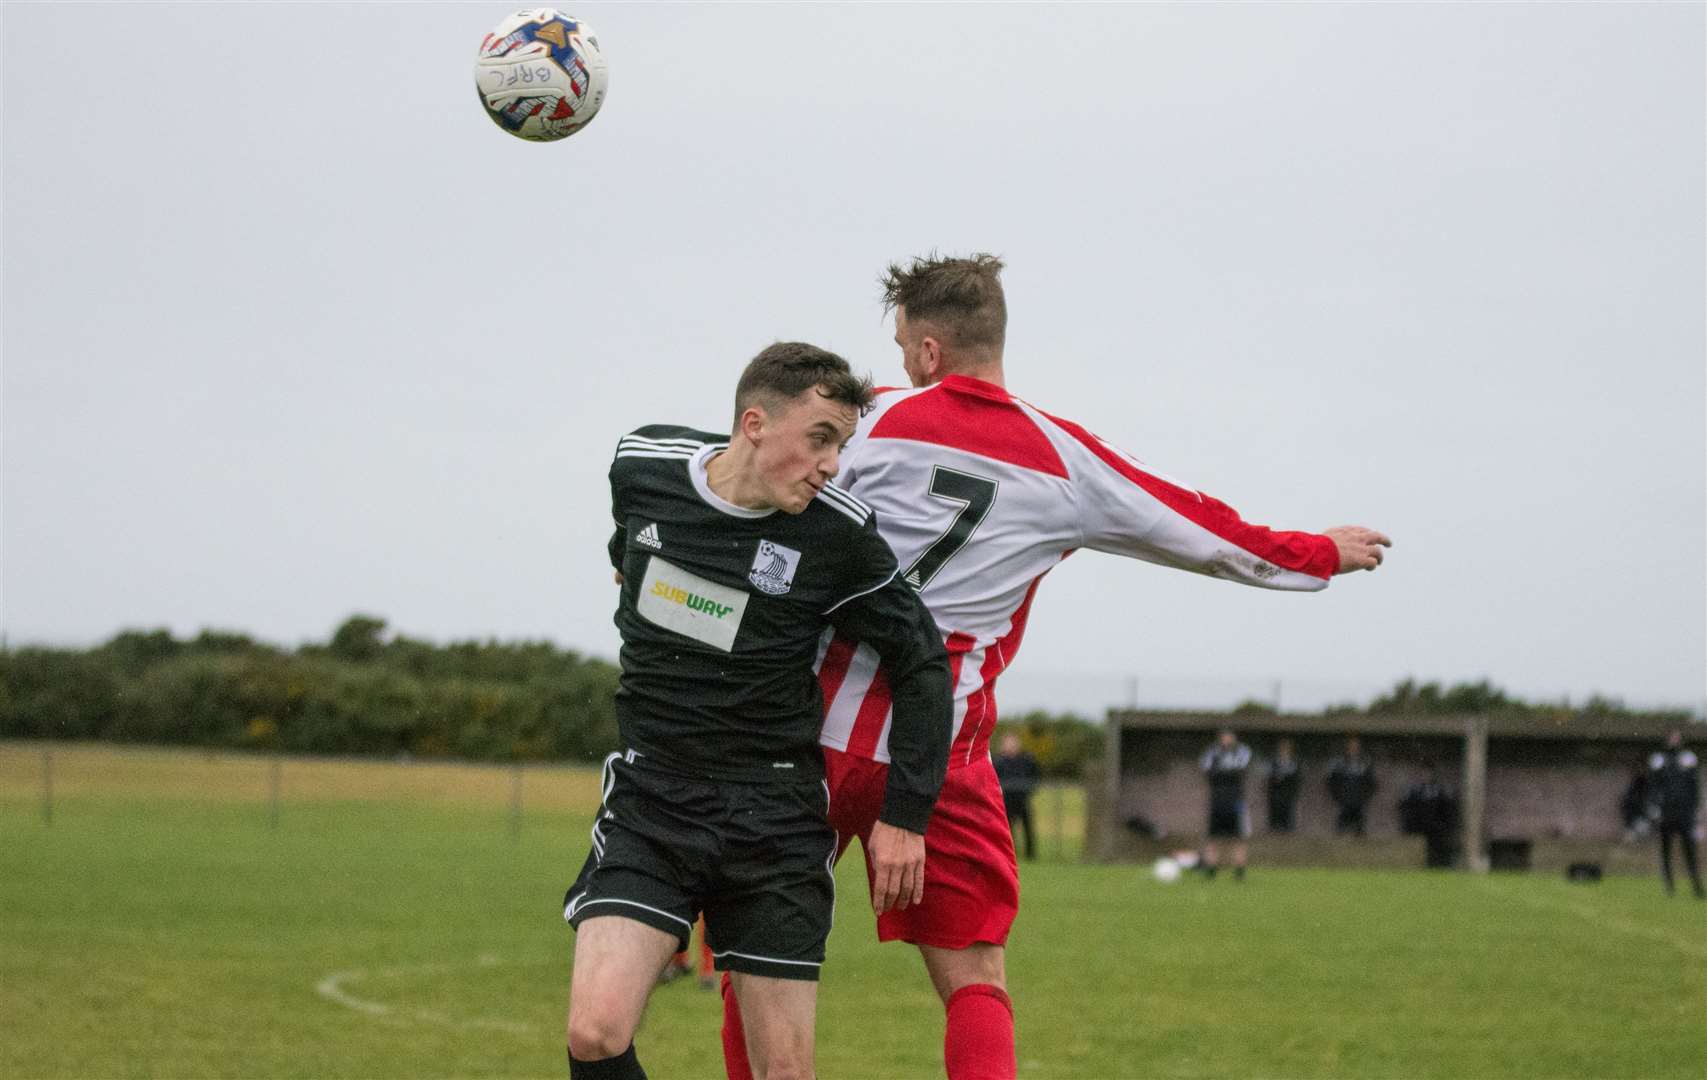 Rovers midfielder Lucas Davidson, pictured here challenging Sunnybank's Edward Fuller for the ball, had another fine game, claiming a goal. Picture: Becky Saunderson